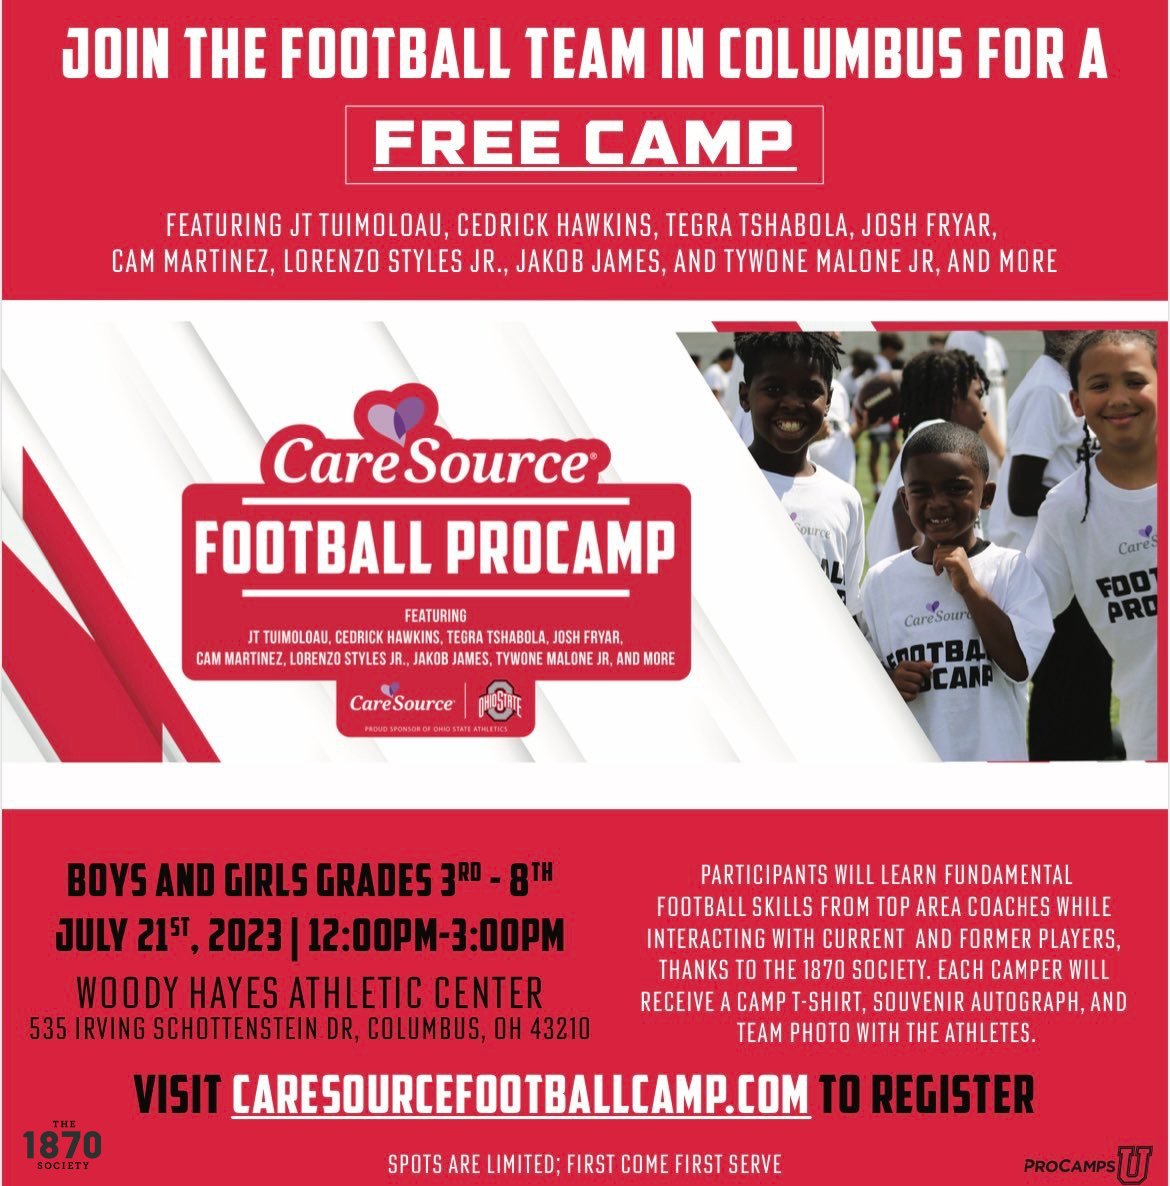 We are excited to tackle the day with @ProCamps and some of Ohio’s best at the FREE @caresource Football Camp on July 21st 🏈 🙌 Click below to register for skills and drills at the Woody Hayes Athletic Center. Spots are limited so don't wait! 👉 CareSourceFootballCamp.com